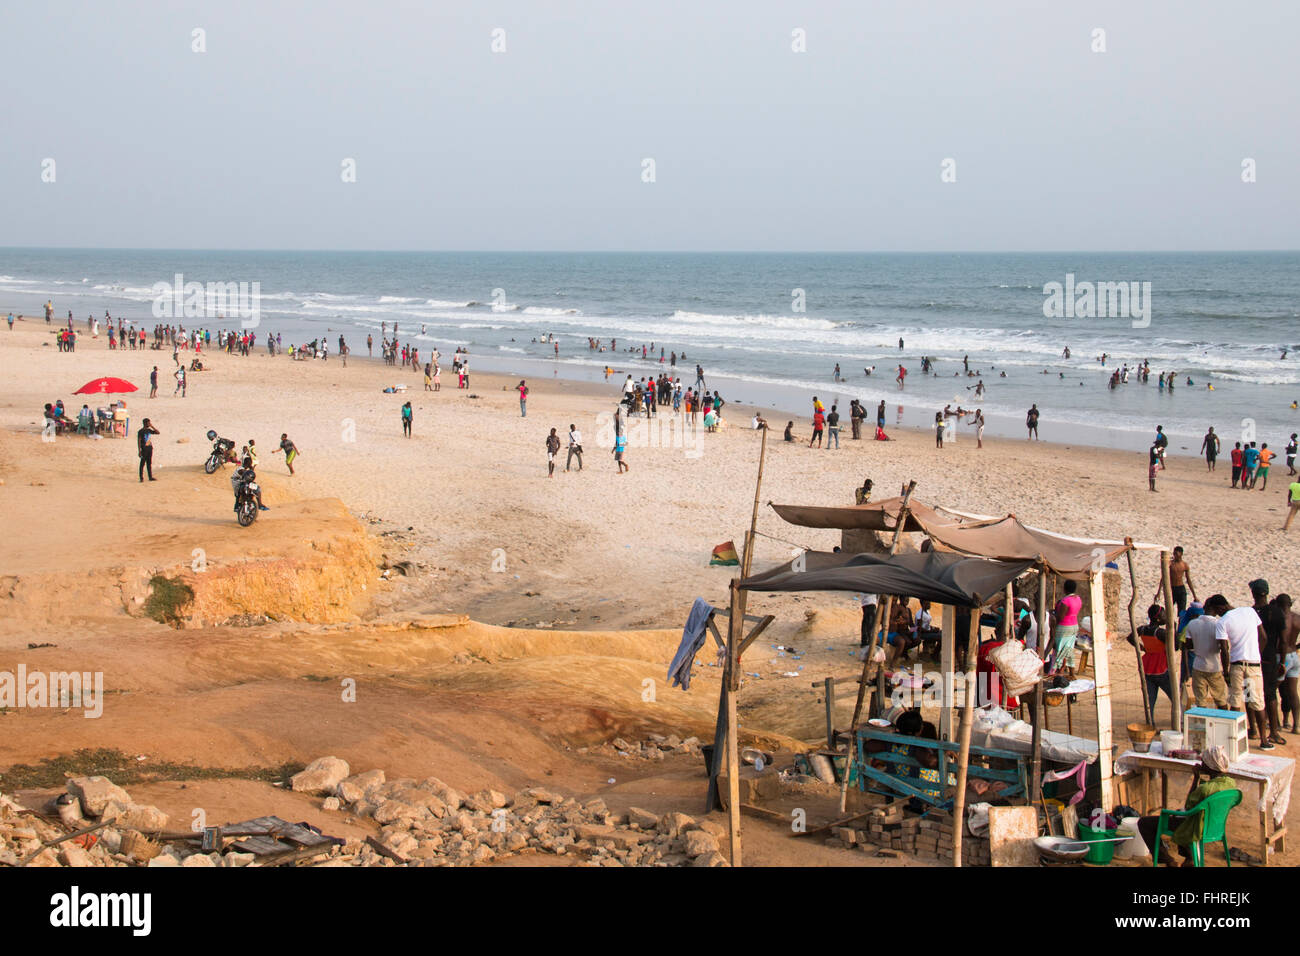 ACCRA, GHANA - JANUARY 2016: Food stall surrounded by people on the beach in Accra, Ghana at the Gulf of Guinea Stock Photo